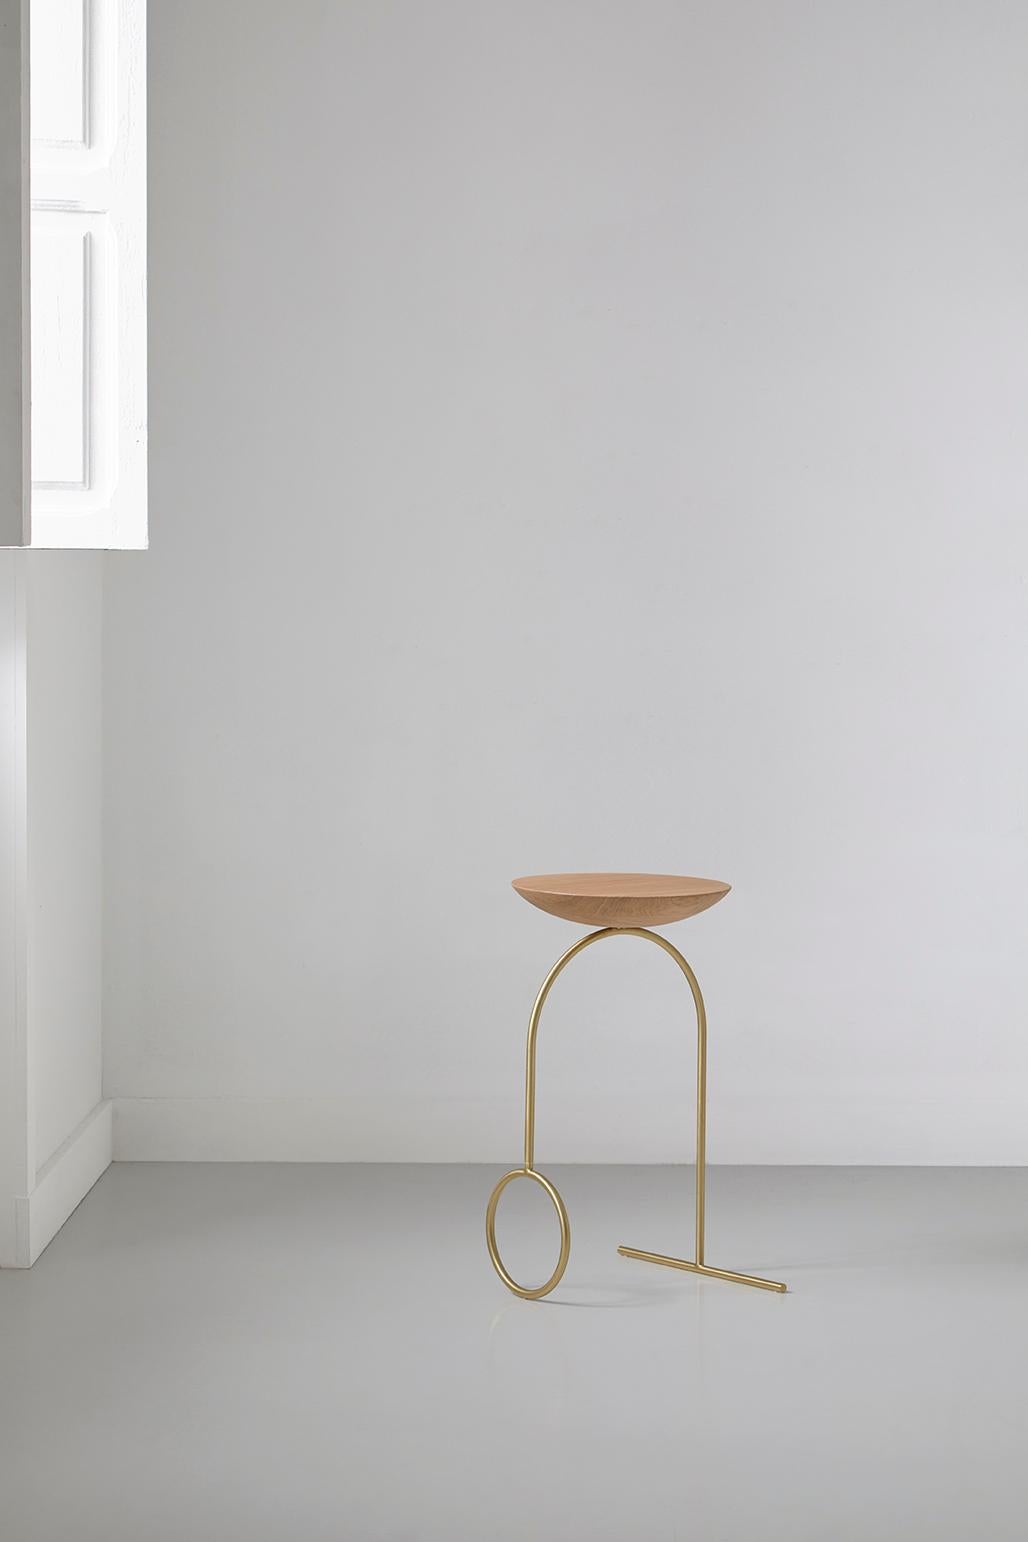 Minimalist Viccarbe Giro Sculptural Table, Matt Oak and Brass Finish by Pedro Paulo Venzón For Sale